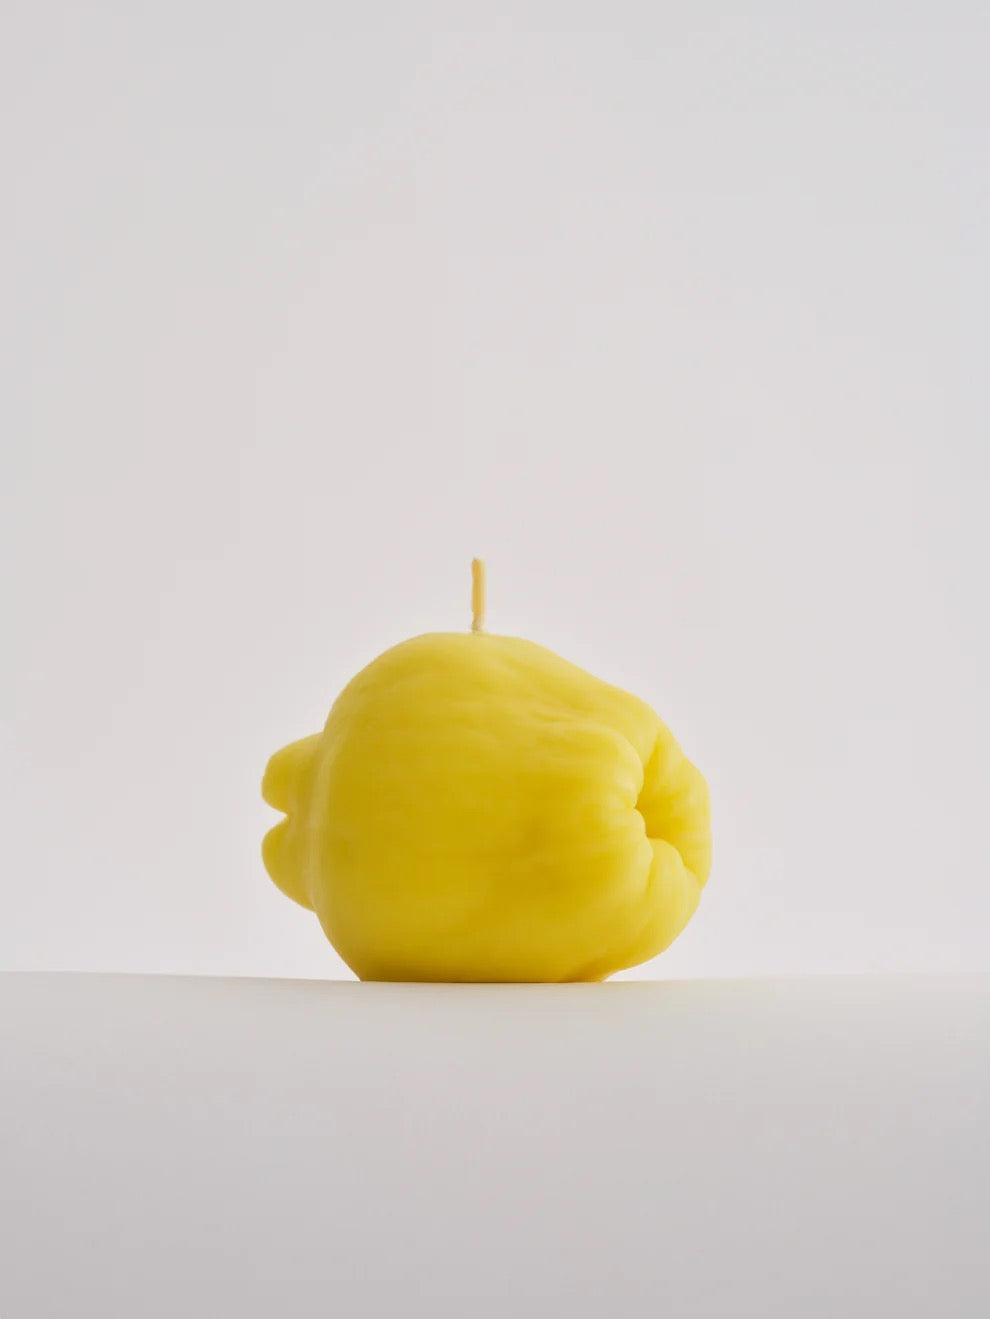 A hand-finished yellow Nonna&#39;s Grocer Quince Candle, made from a soy wax blend, sitting on a white surface.